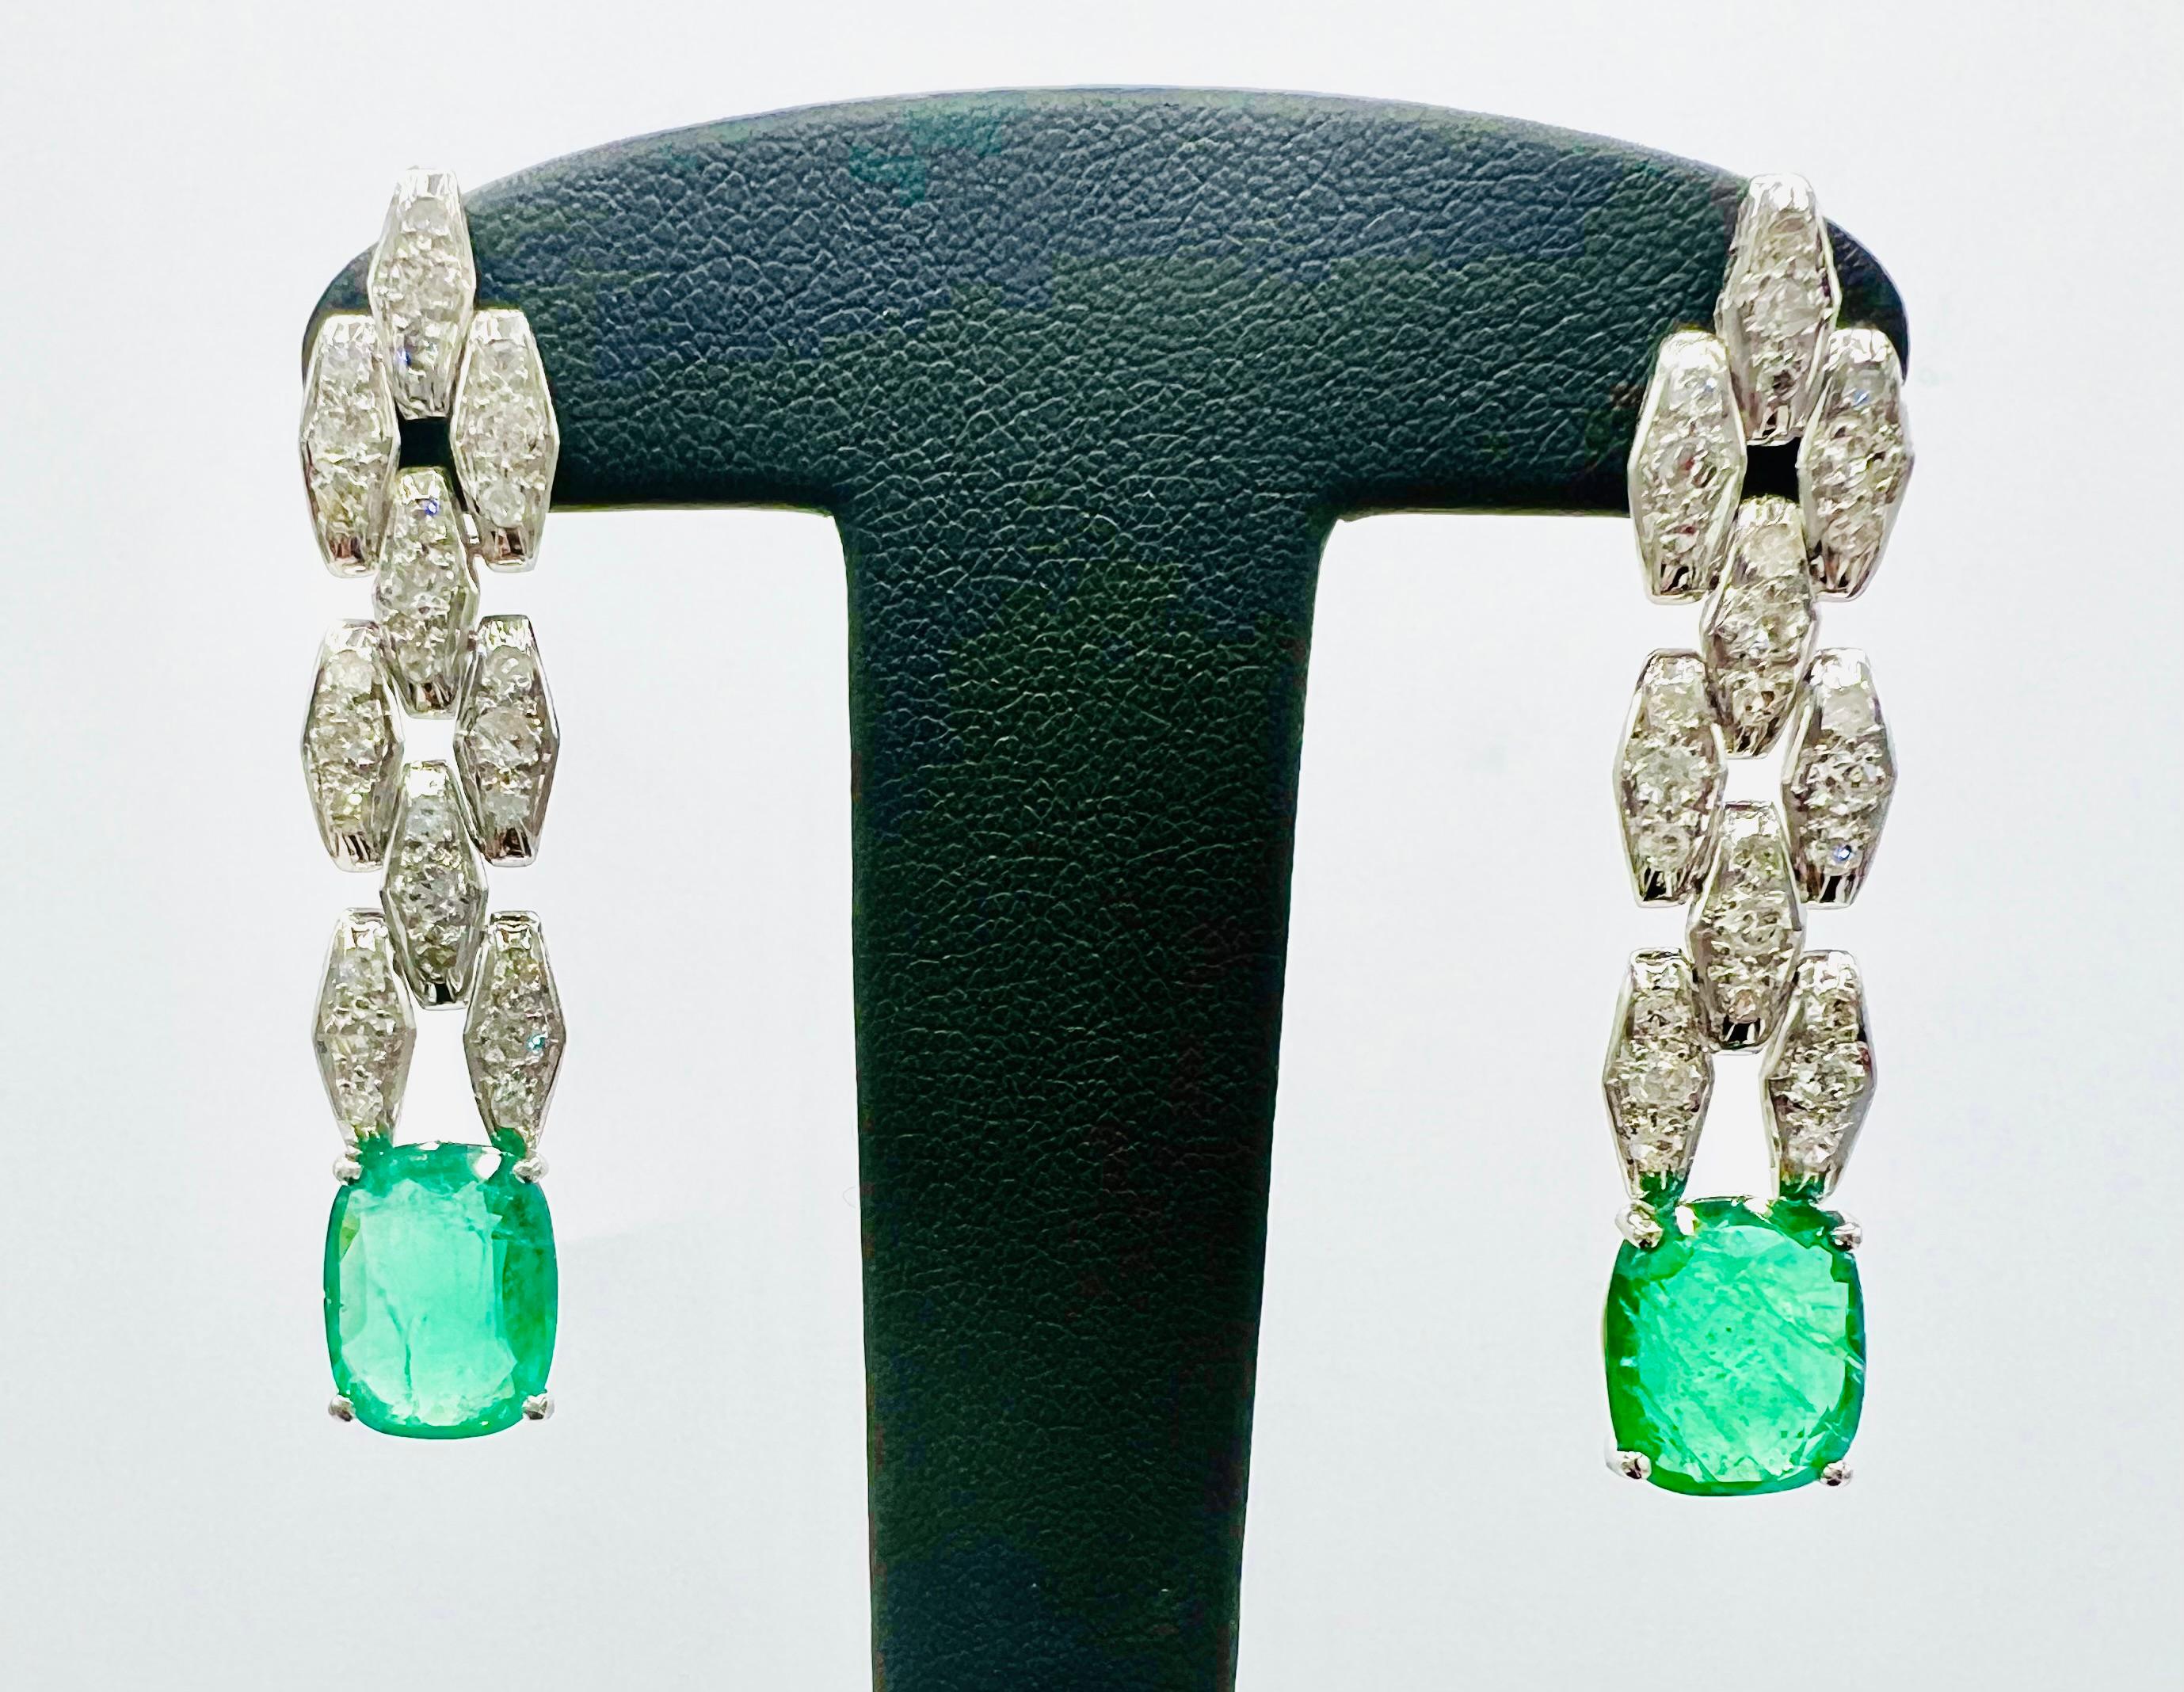 pair of platinum earrings set with 2 emeralds and pavé diamonds
Superb quality, the emeralds weigh a total of 5.50 carats, surrounded by a paving of brilliants for approximately 1 ct in total.
the total weight is 10.70 gr
they measure in length: 4.7